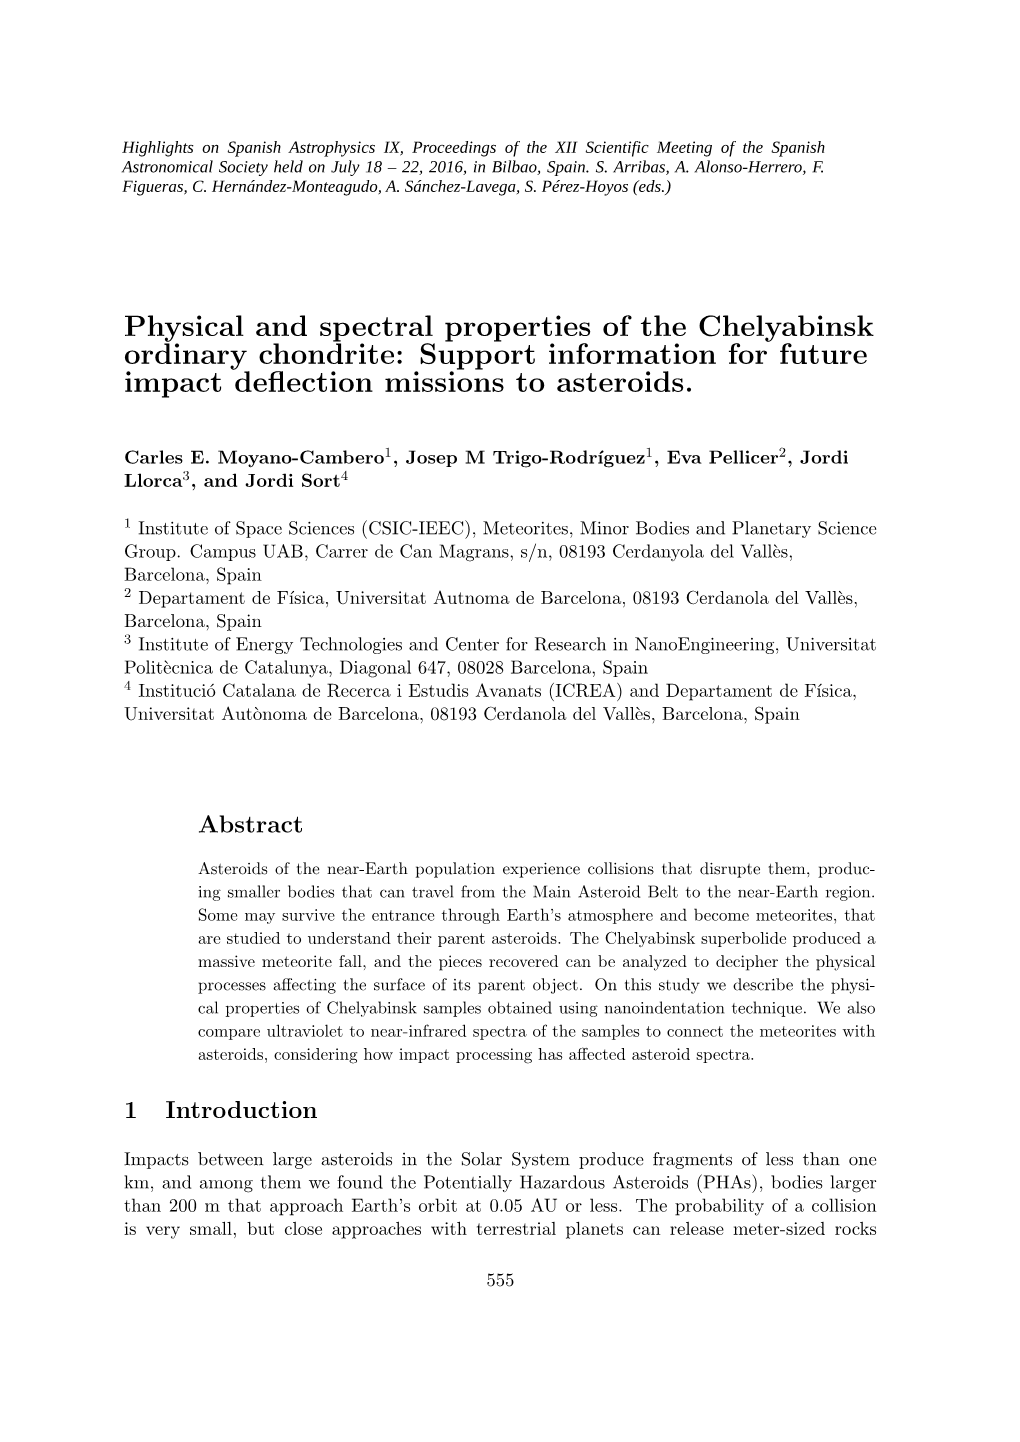 Physical and Spectral Properties of the Chelyabinsk Ordinary Chondrite: Support Information for Future Impact Deﬂection Missions to Asteroids